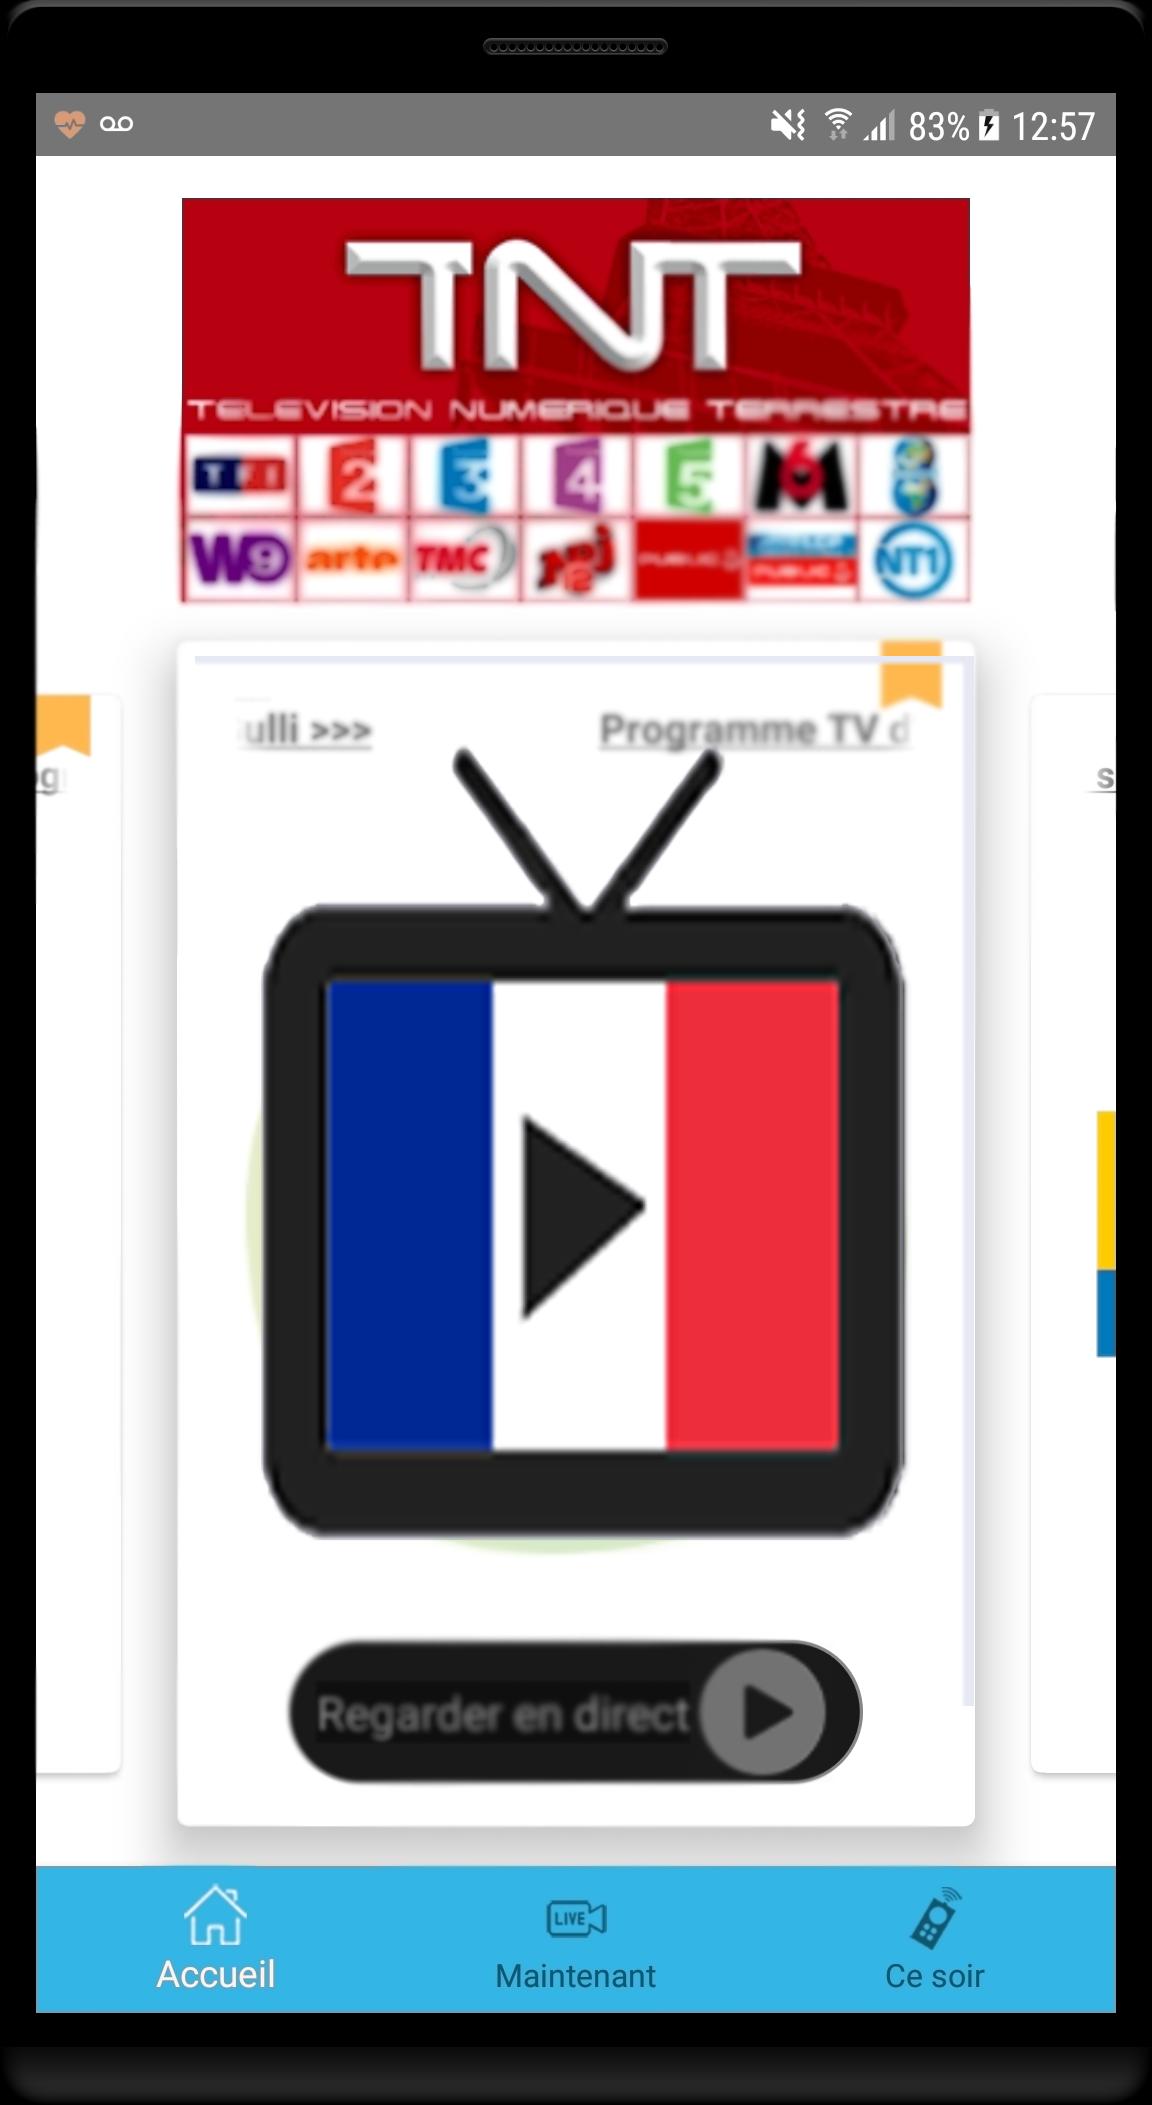 TNT France TV Direct ( Guide Programme TV ) for Android - APK Download